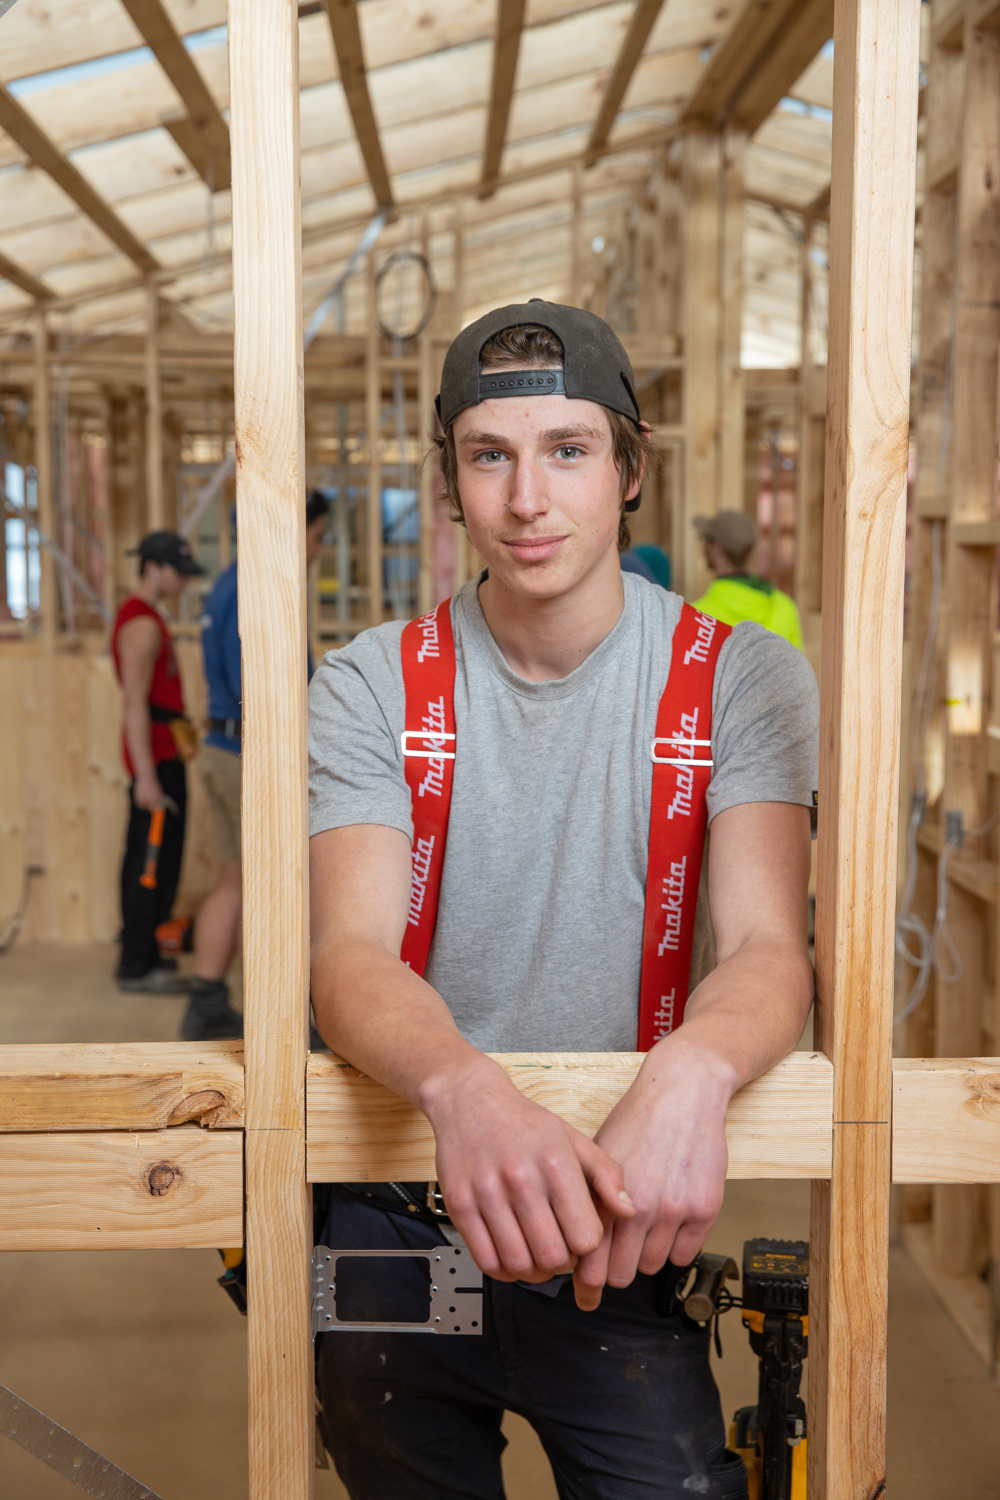 Dominic McCosh studied the Certificate II in Building and Construction at South West TAFE